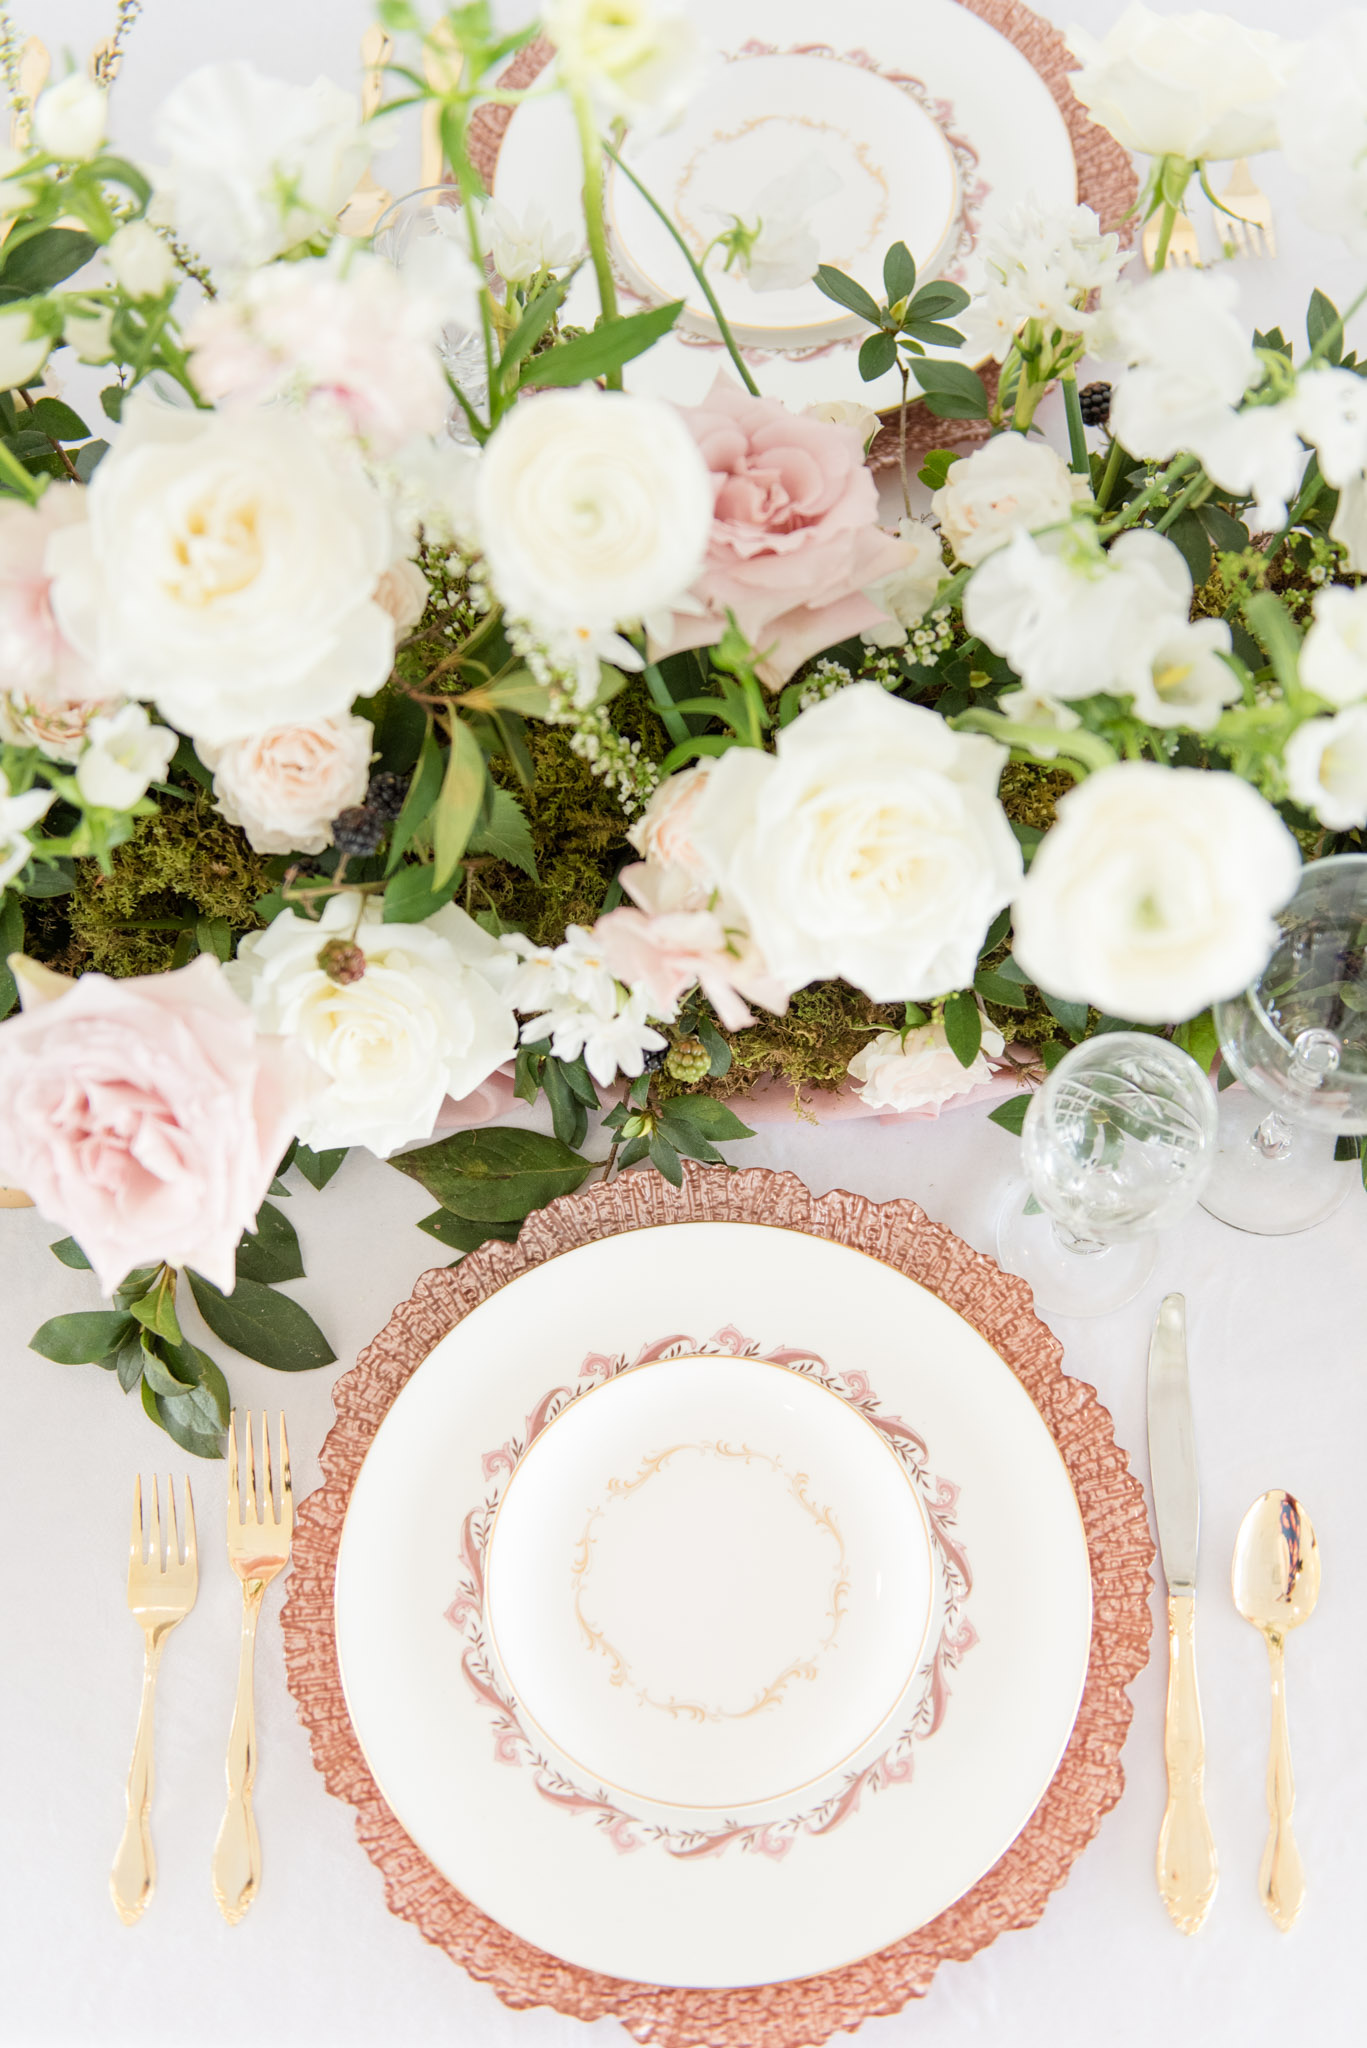 Blush and white table setting